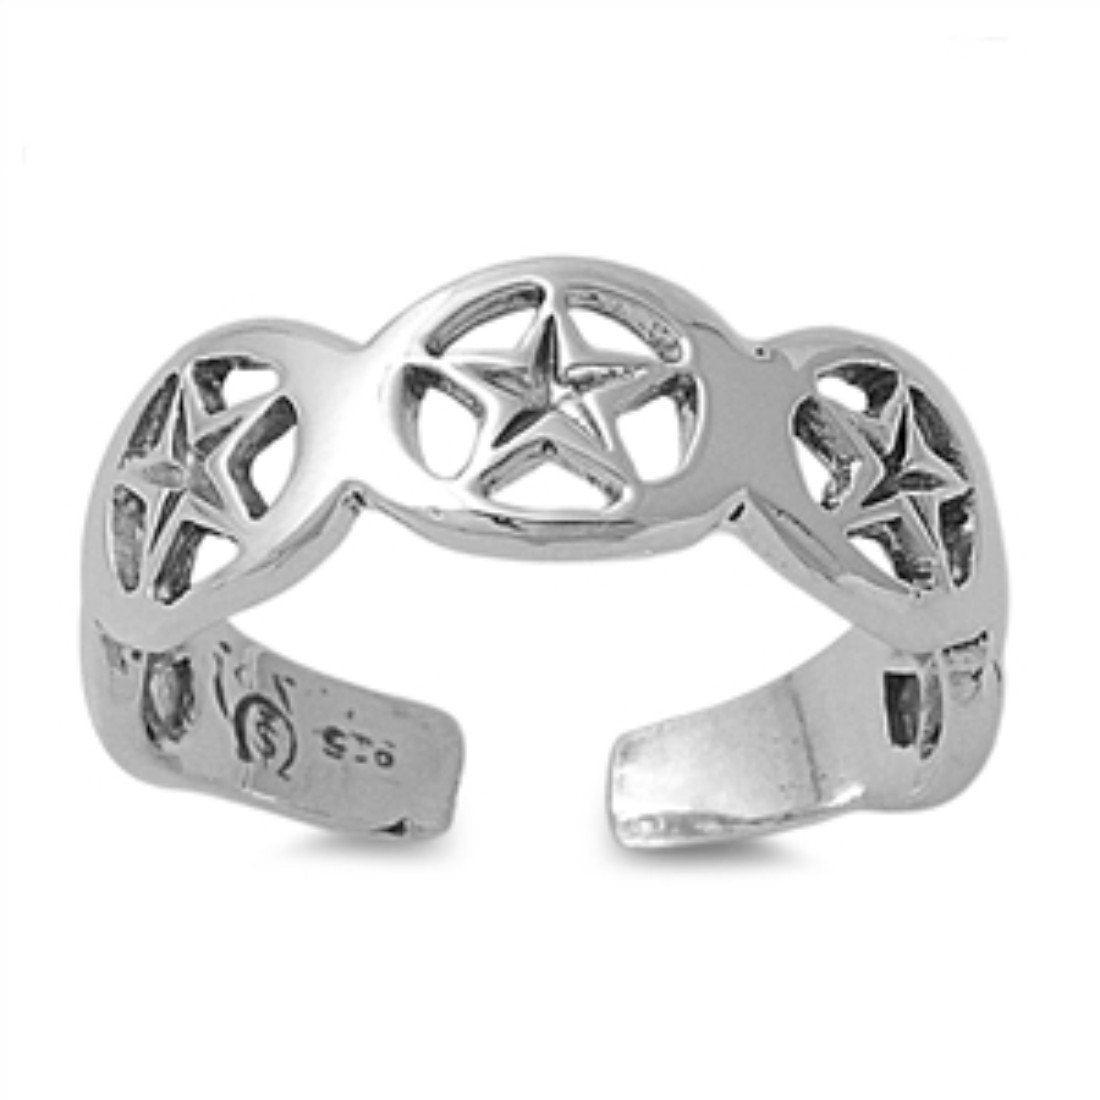 Star Silver Toe Ring Adjustable Band 925 Sterling Silver (5mm)